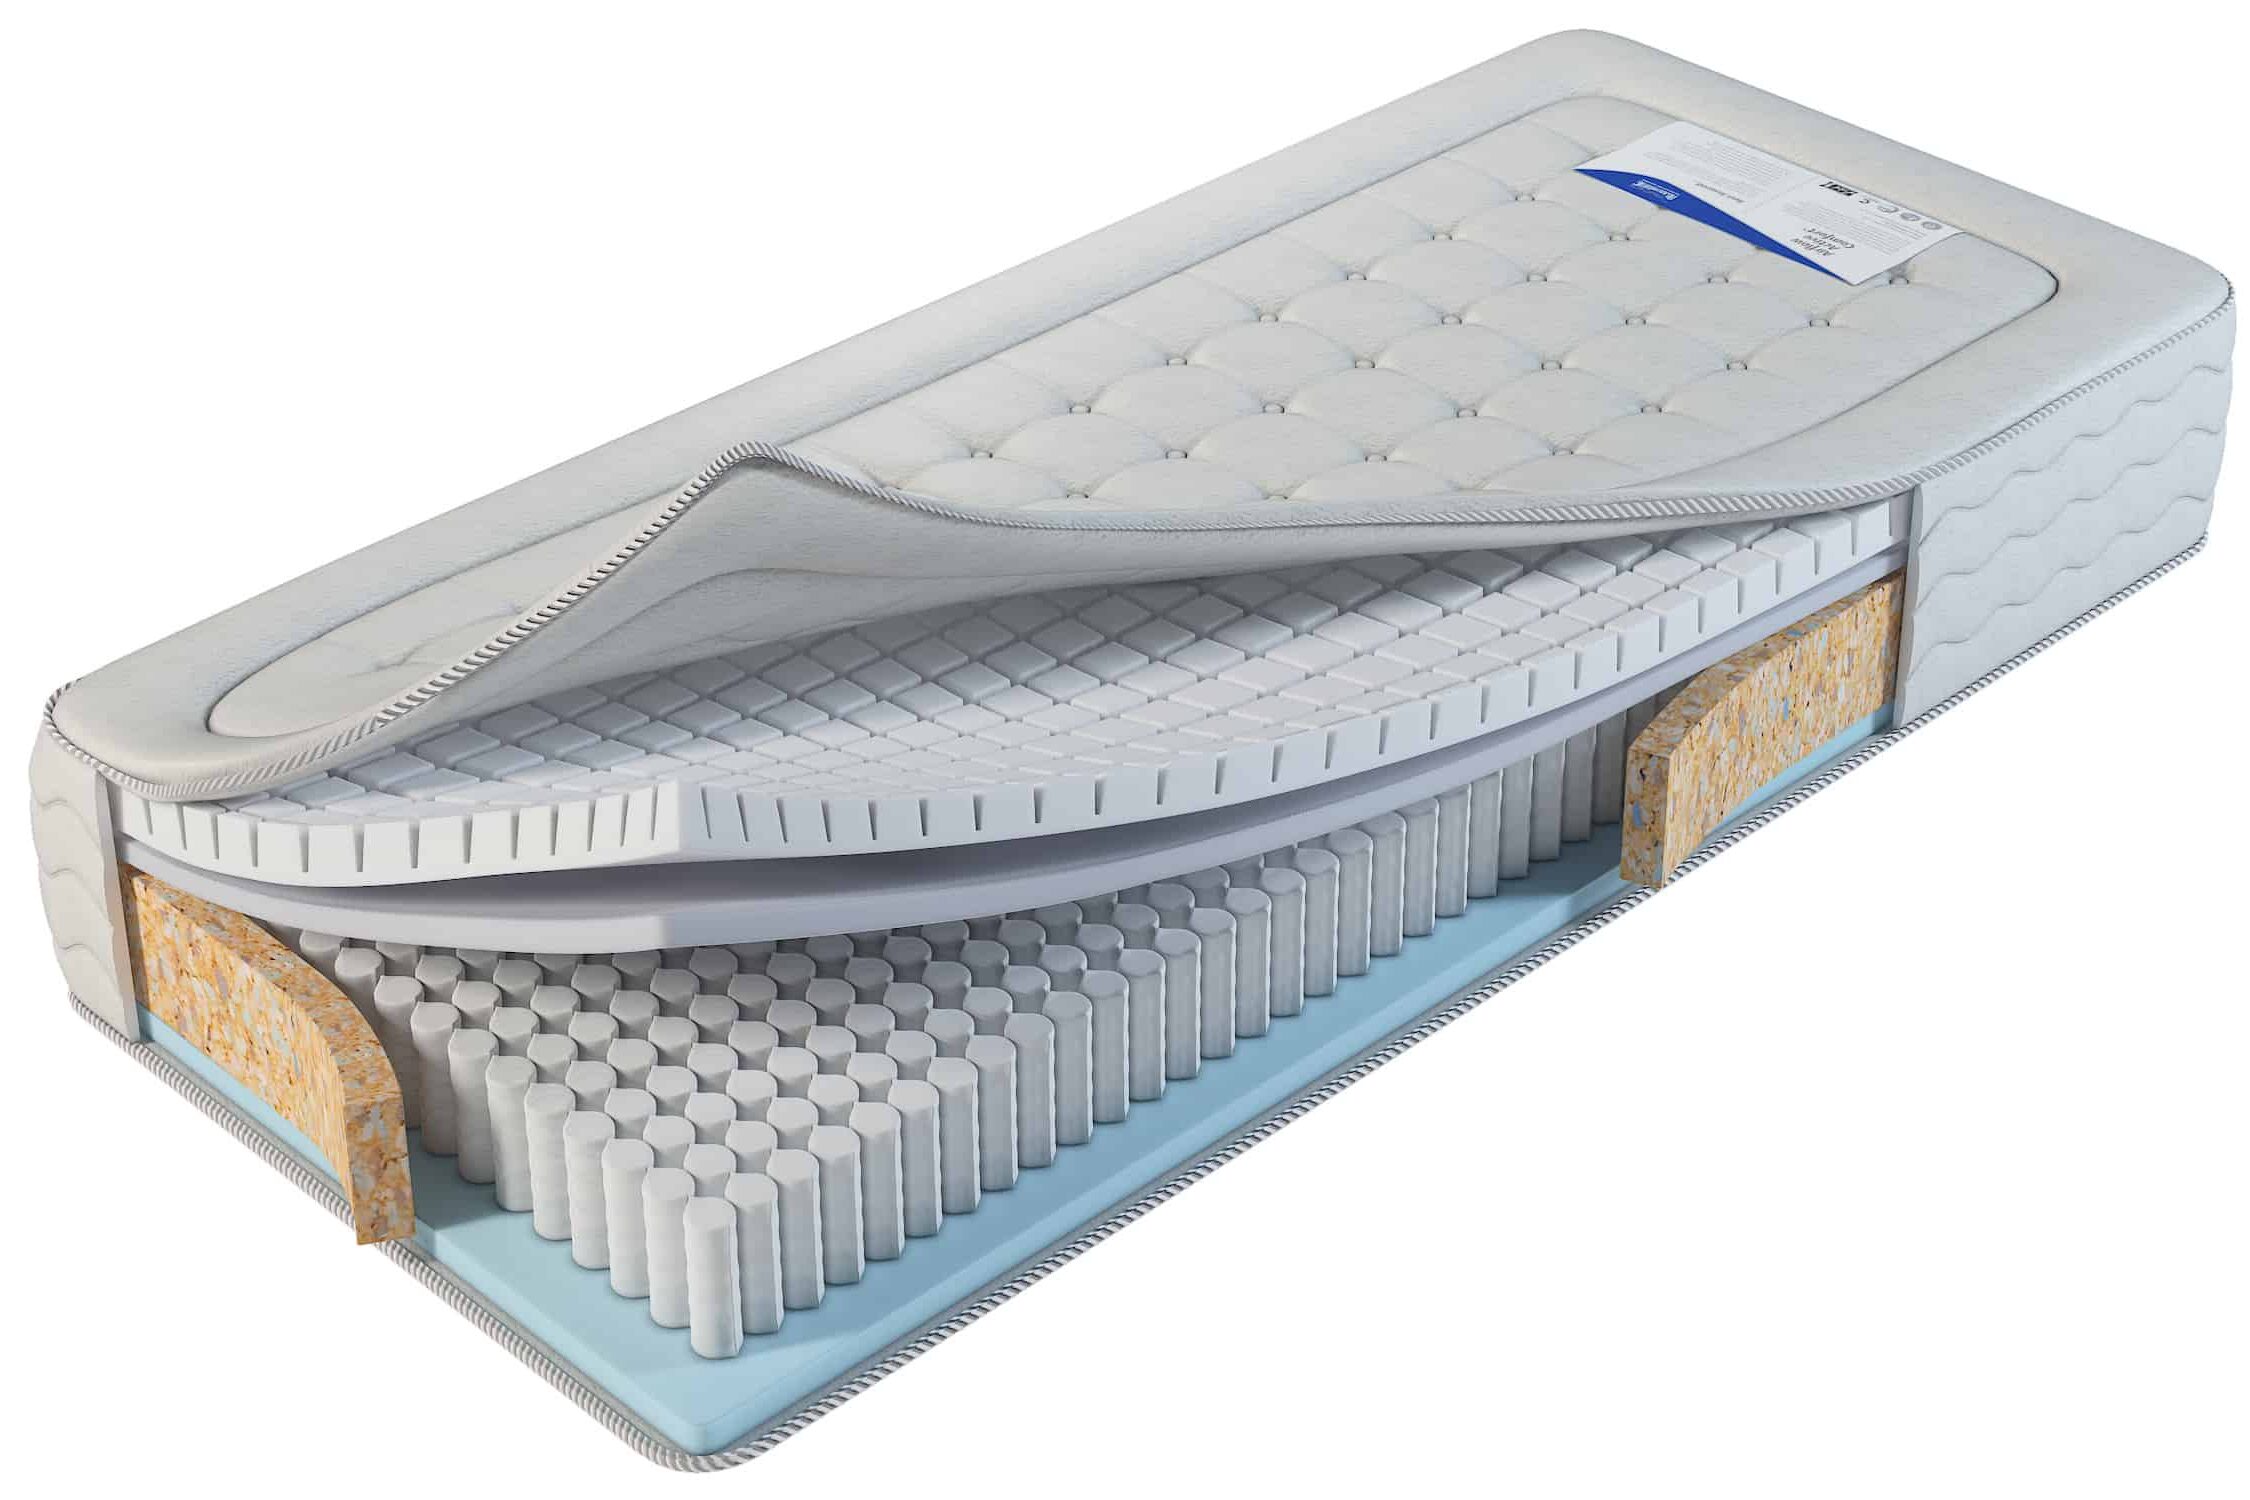 Cross section of the AirFlow mattress.